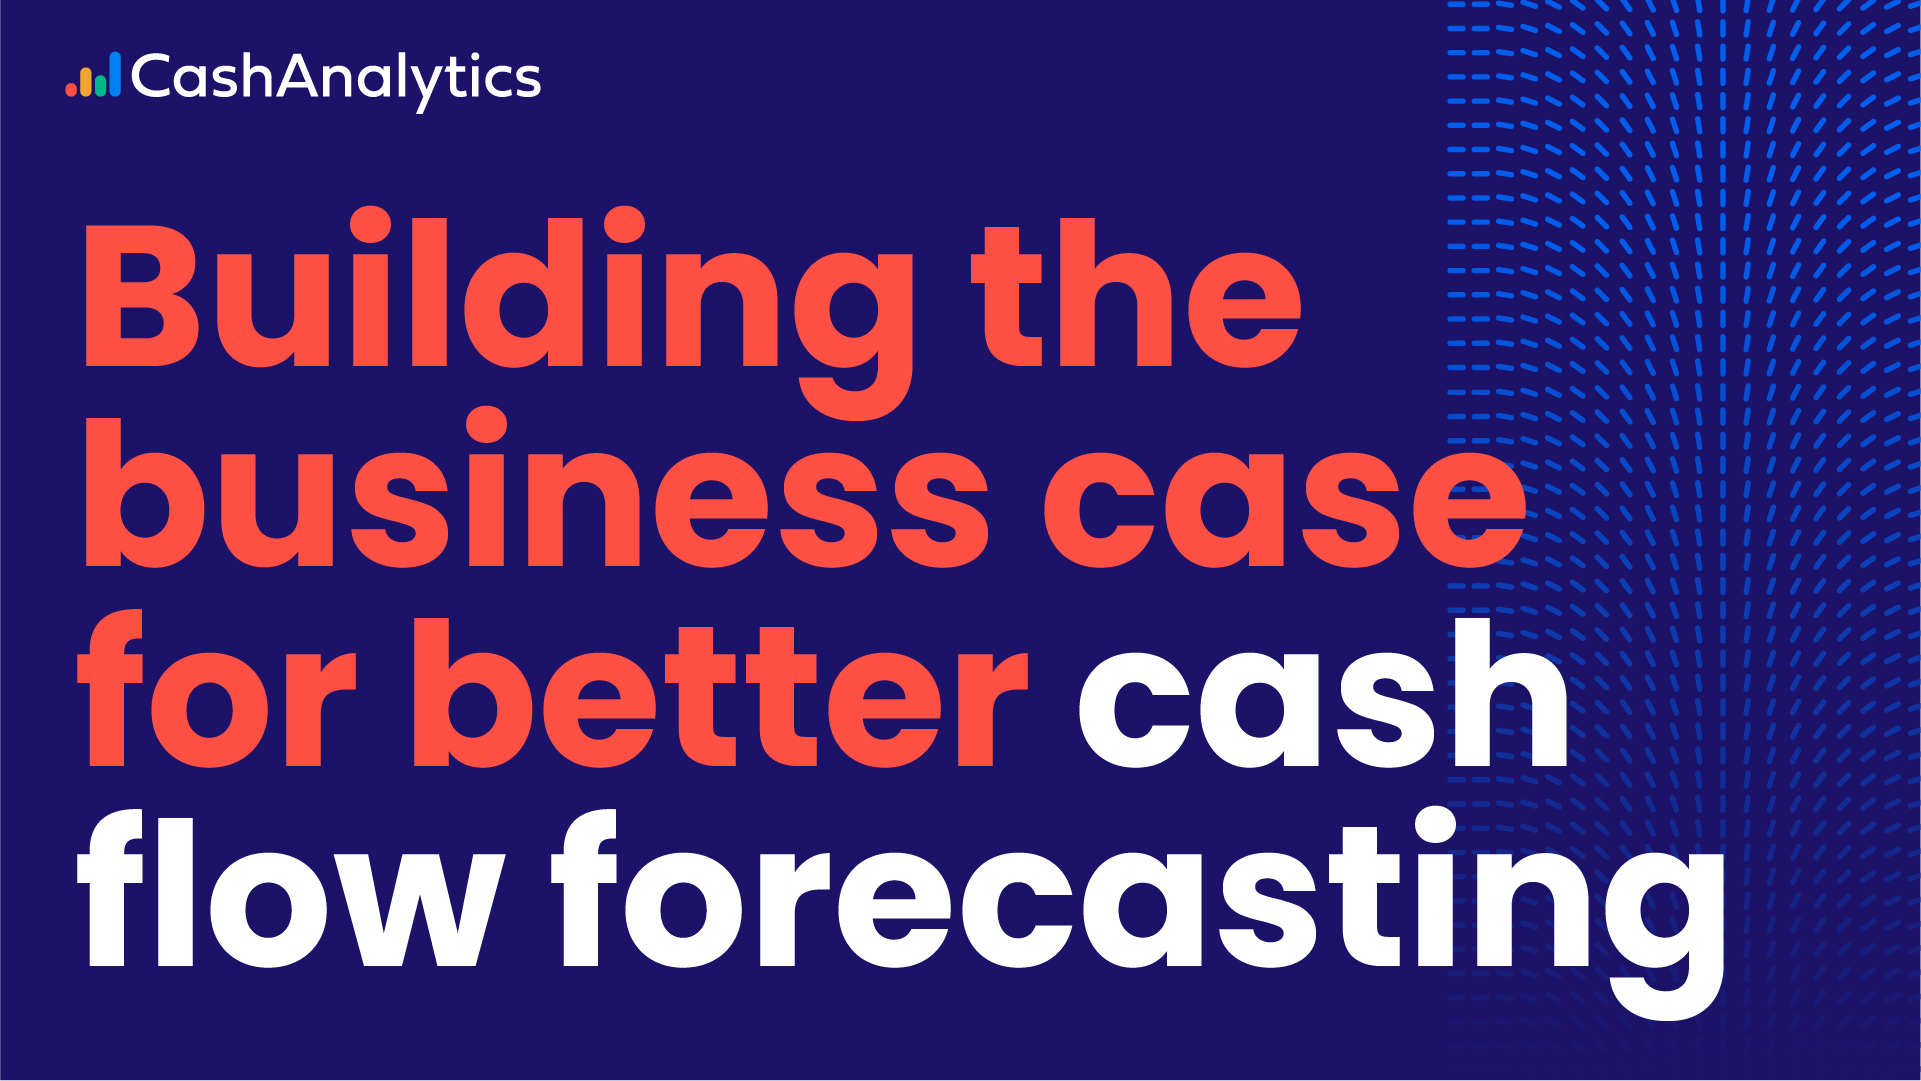 Building the business case for better cash flow forecasting